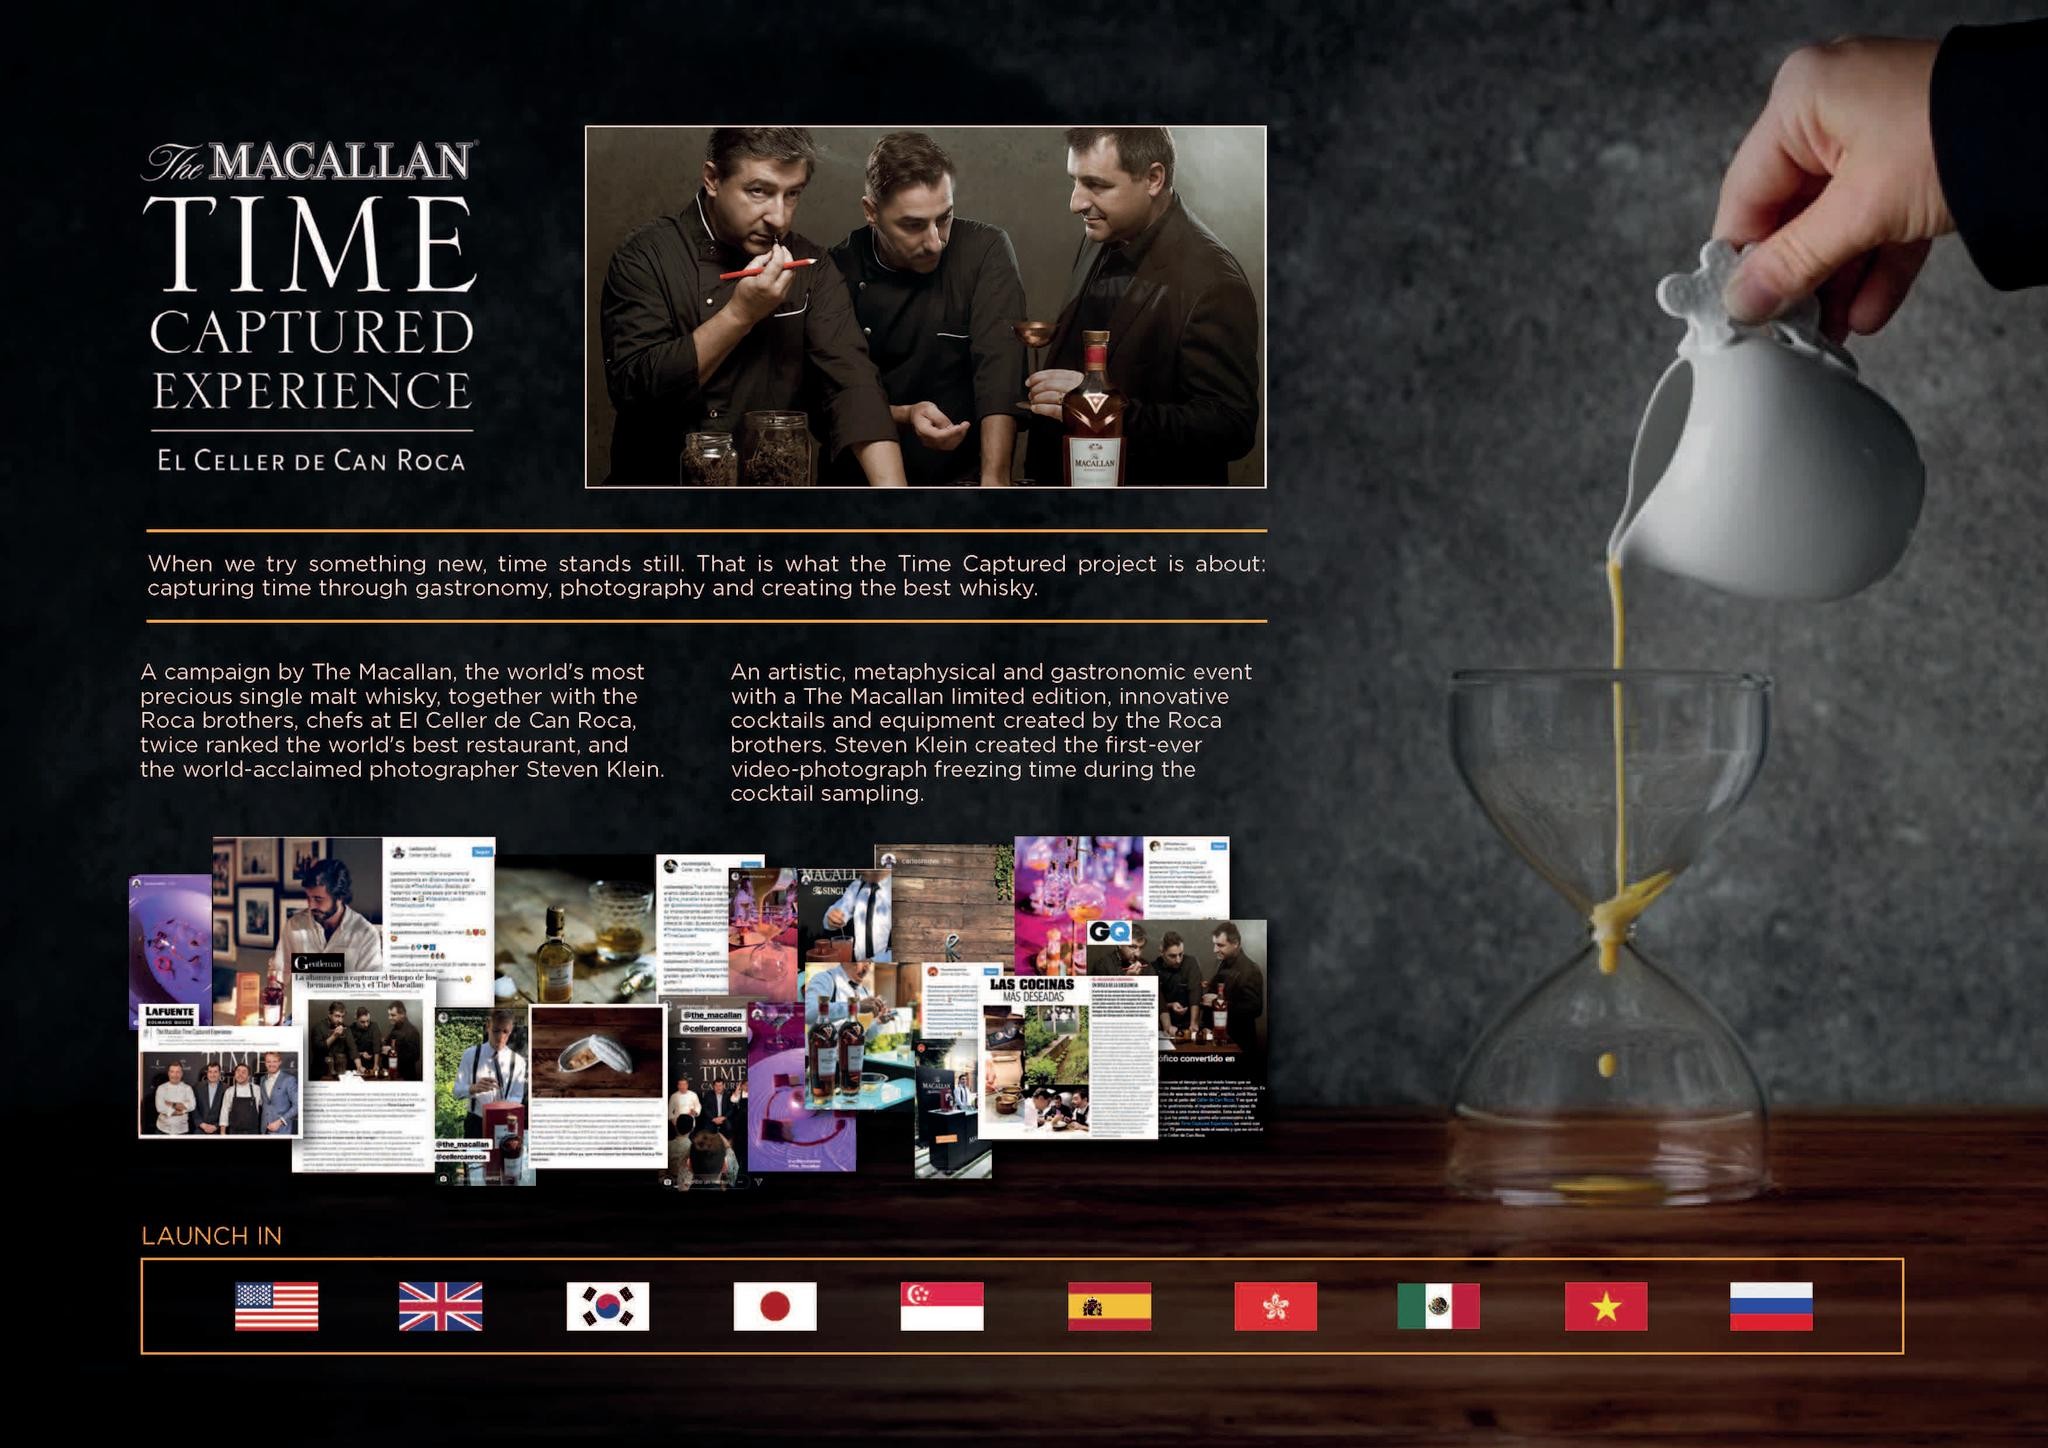 The Macallan Time Captured